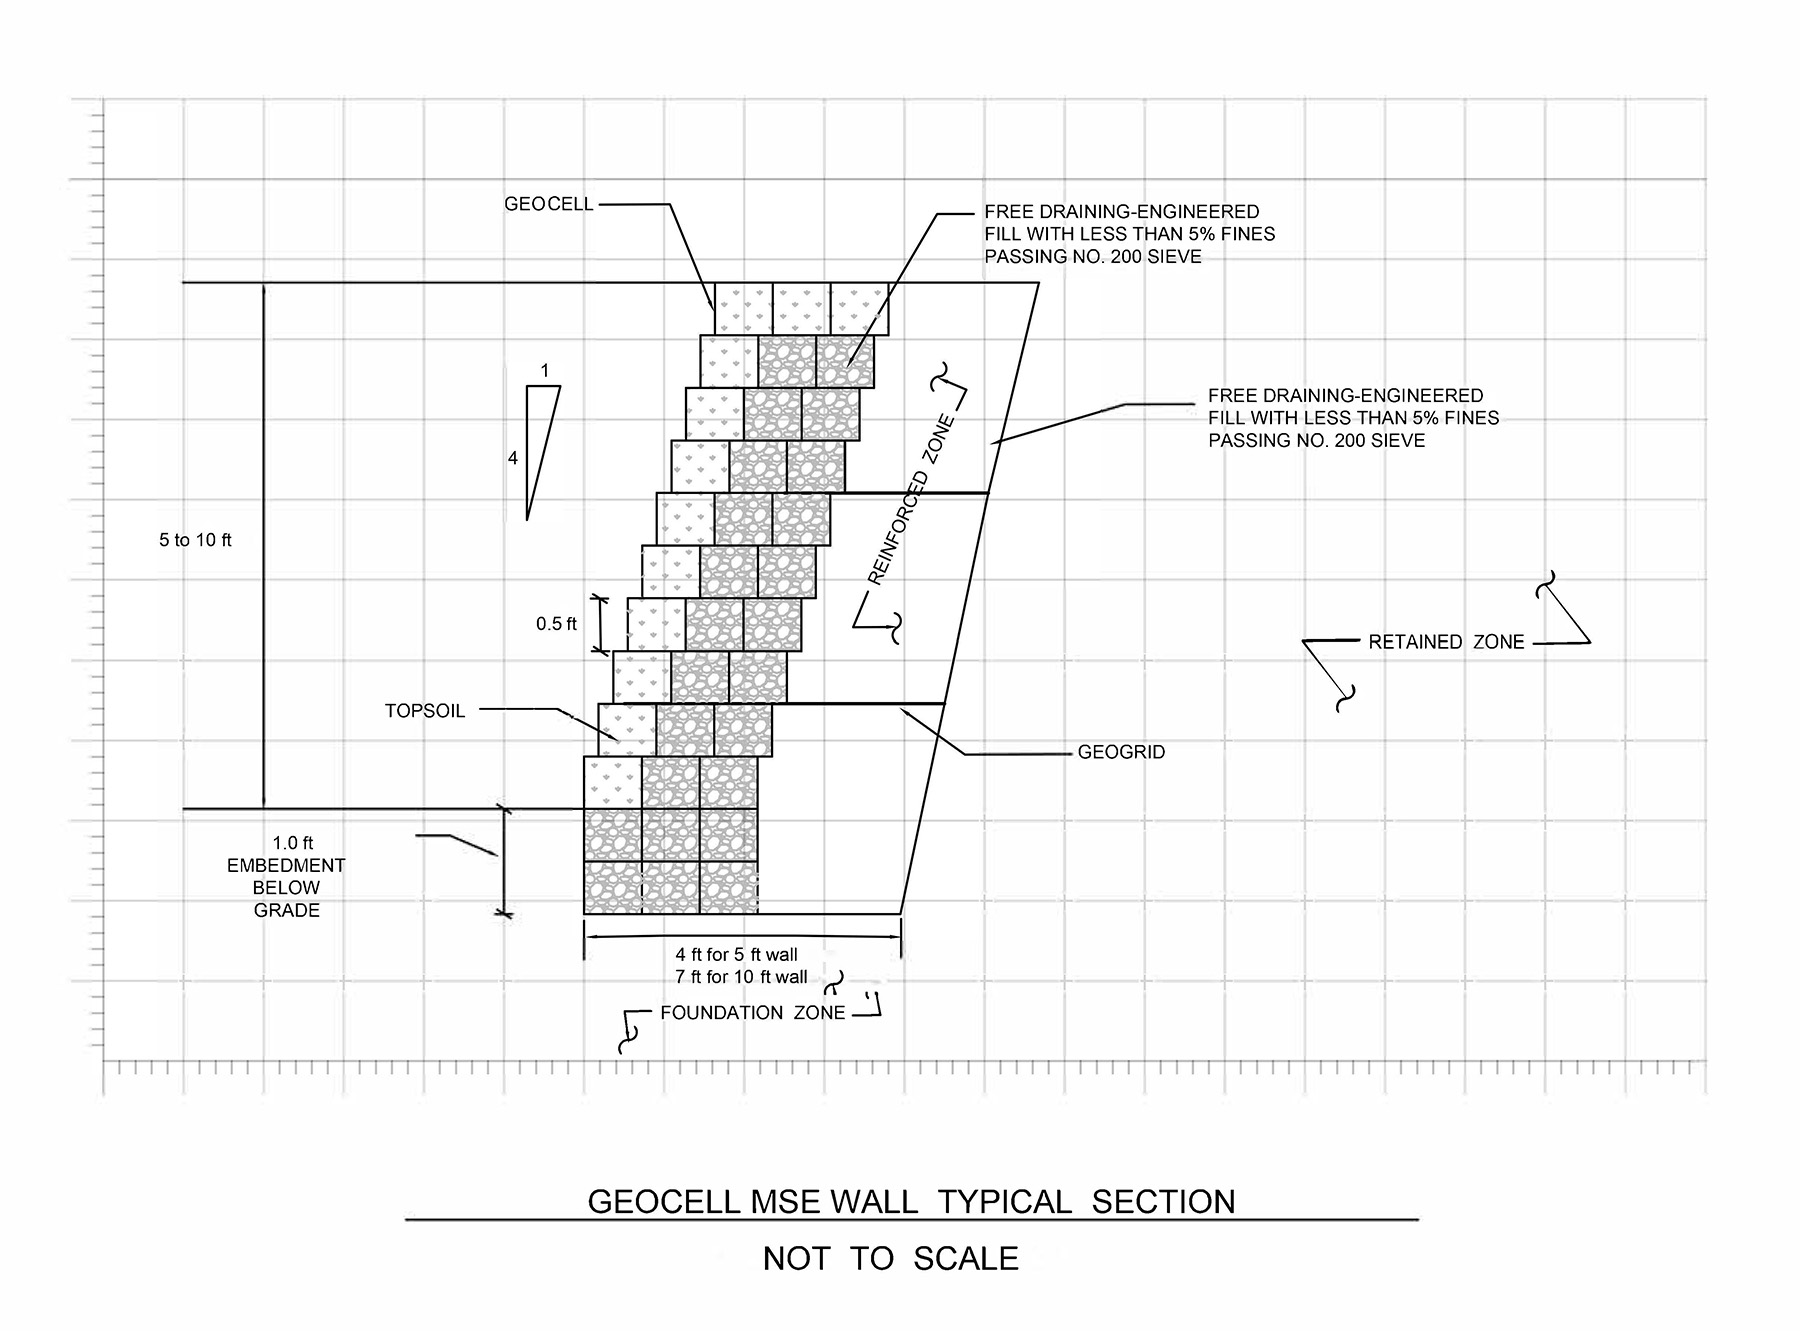 The parts of a geocell wall are shown including below-grade embedment, geogrid, reinforced zone, and foundation zone among other elements.